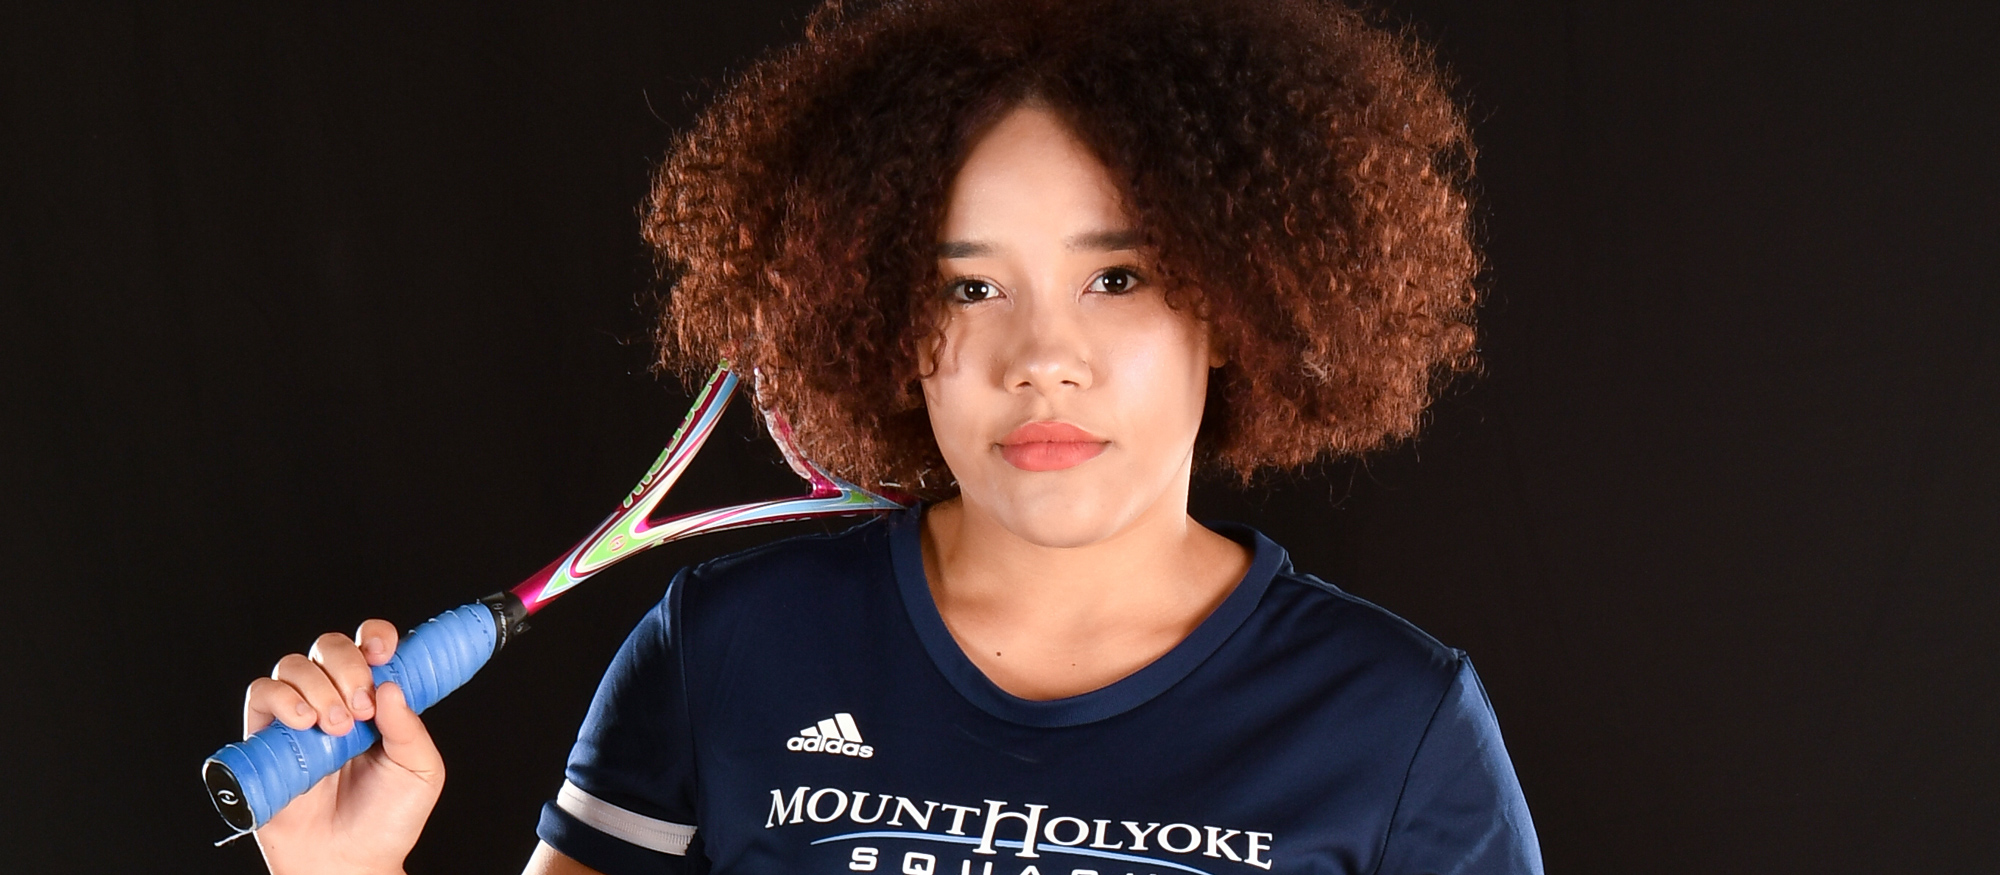 Xaria Durocher came back from a 2-0 deficit to defeat Wellesley's Miraya Gupta, completing a 2-0 day for Mount Holyoke's No. 1 player on Nov. 19, 2022. (RJB Sports)